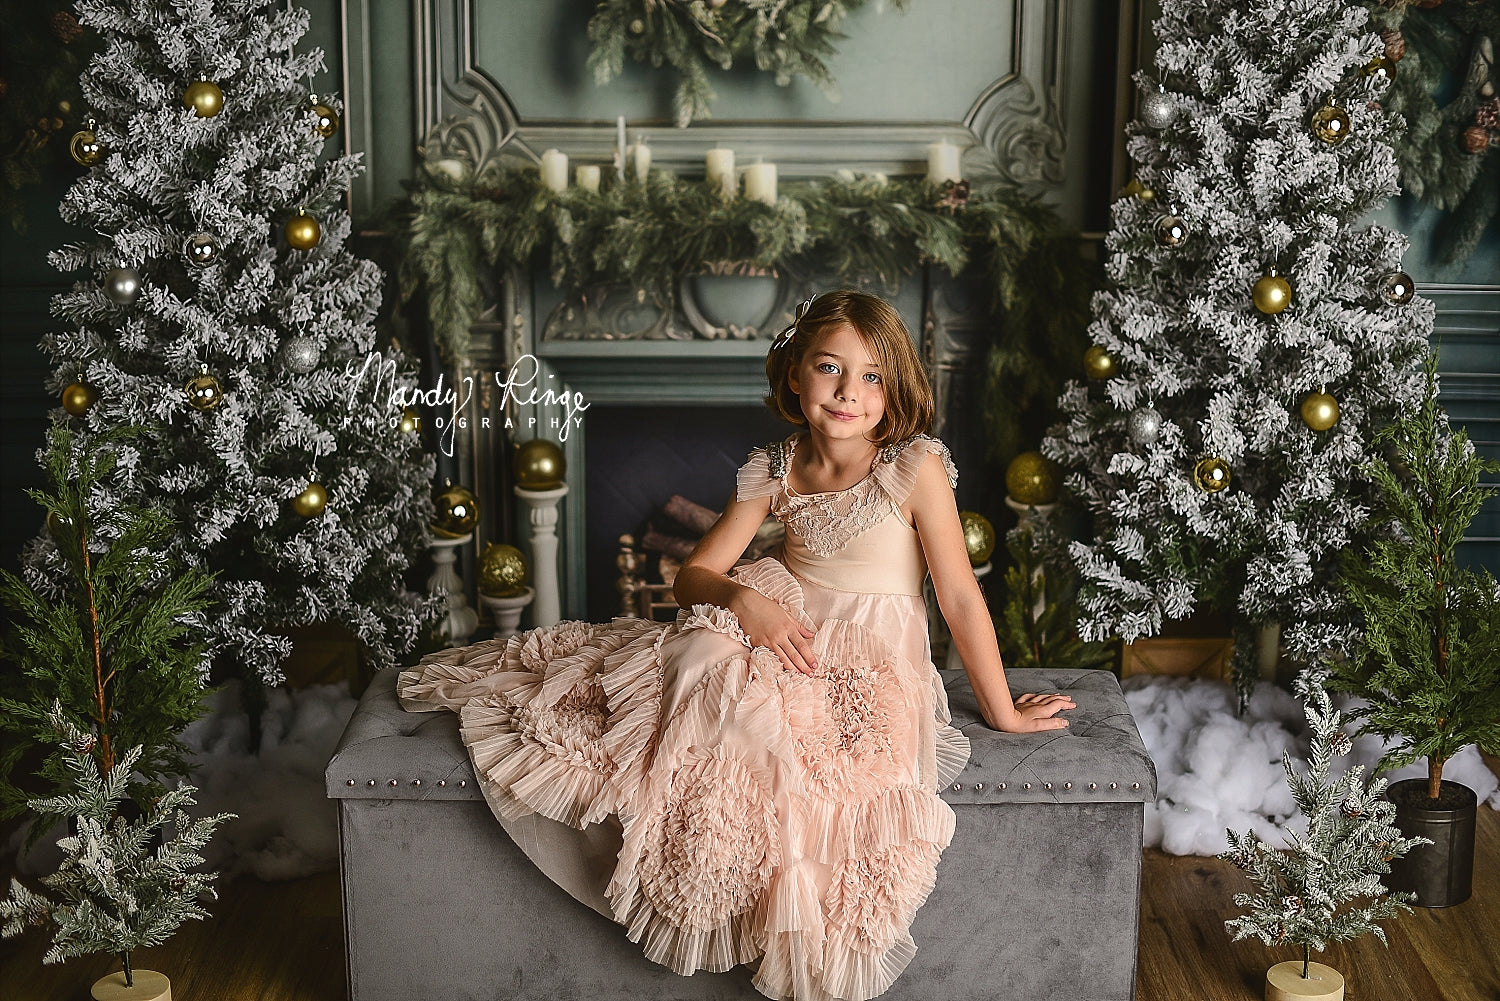 Kate Green Christmas Fireplace Backdrop Designed by Mandy Ringe Photography